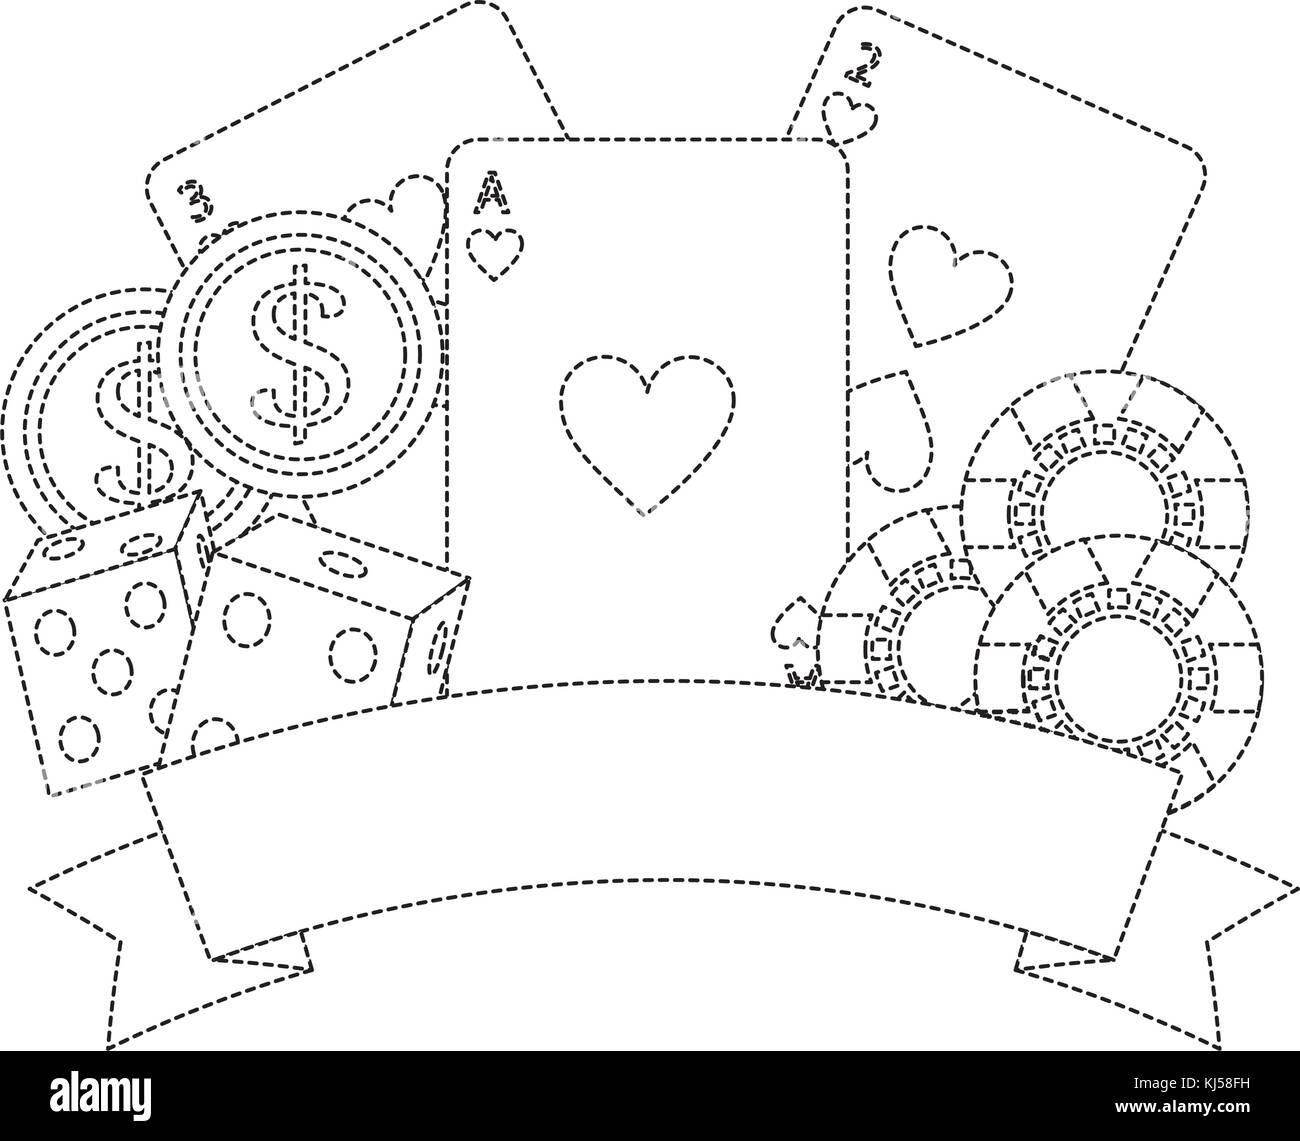 Playing cards vector black and white stock photos images